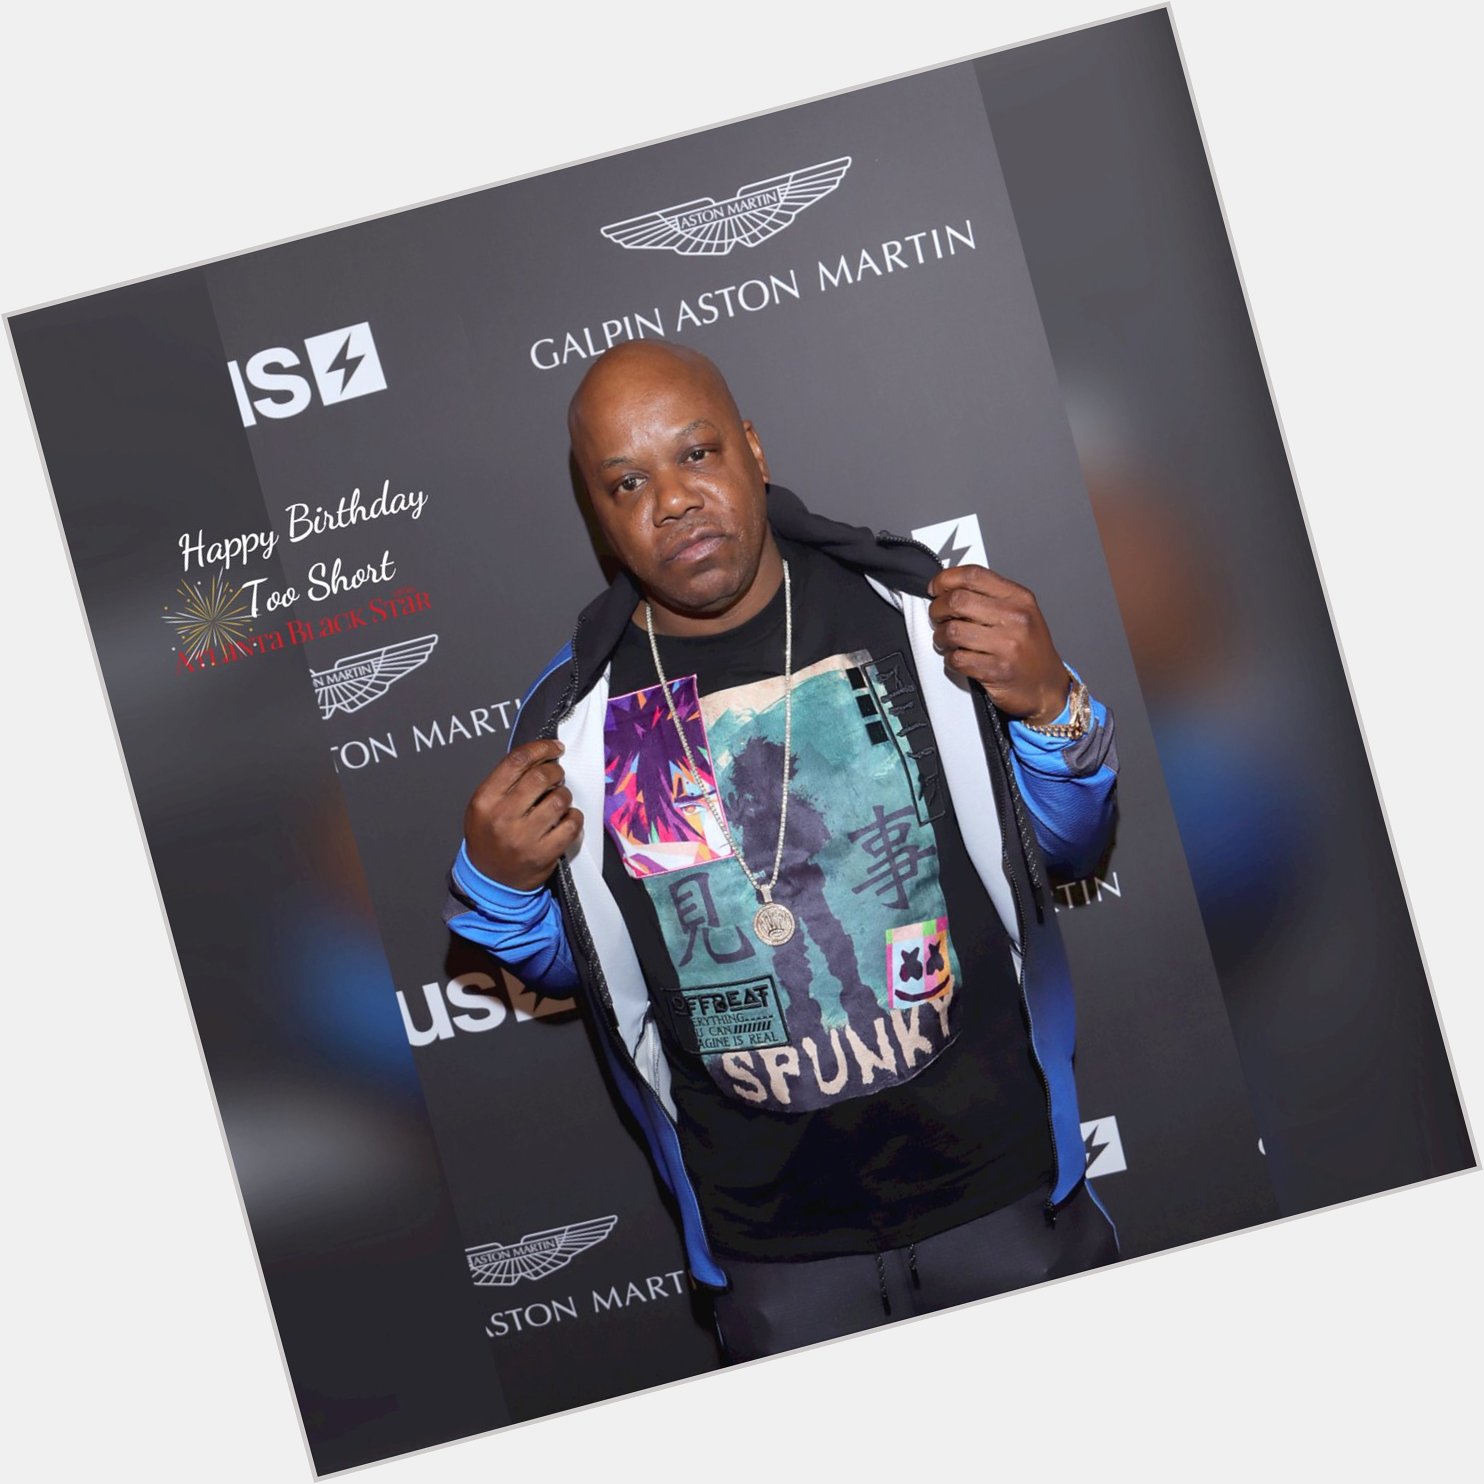 Happy 55th Birthday to the legendary rapper, Too Short! Wishing you many more to come brother 